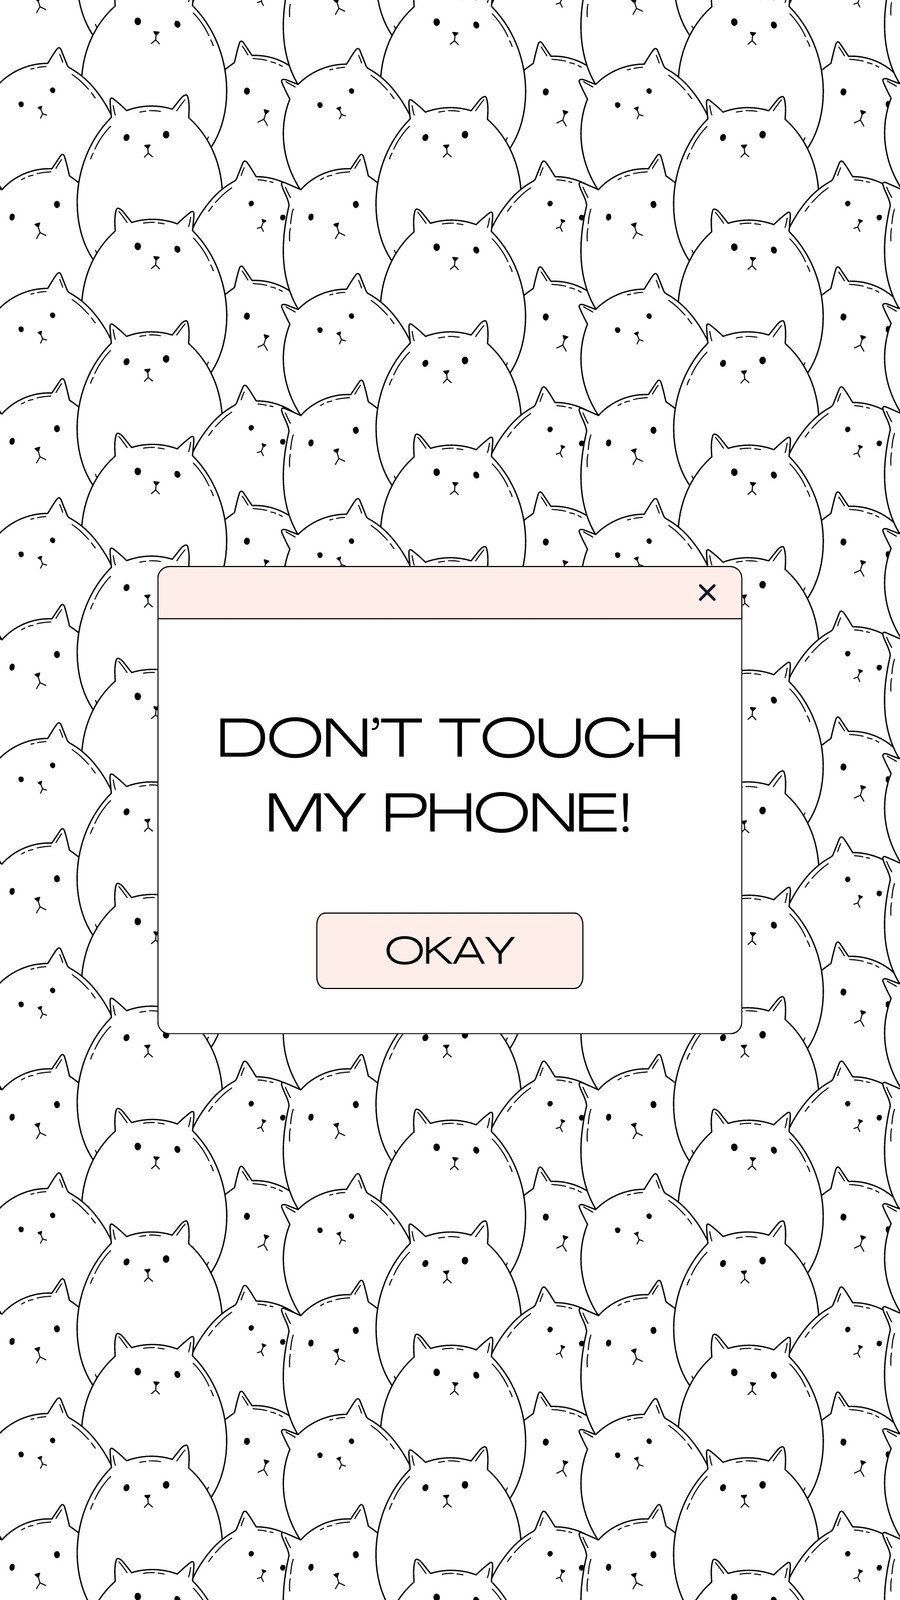 IPhone wallpaper don't touch my phone - Don't touch my phone